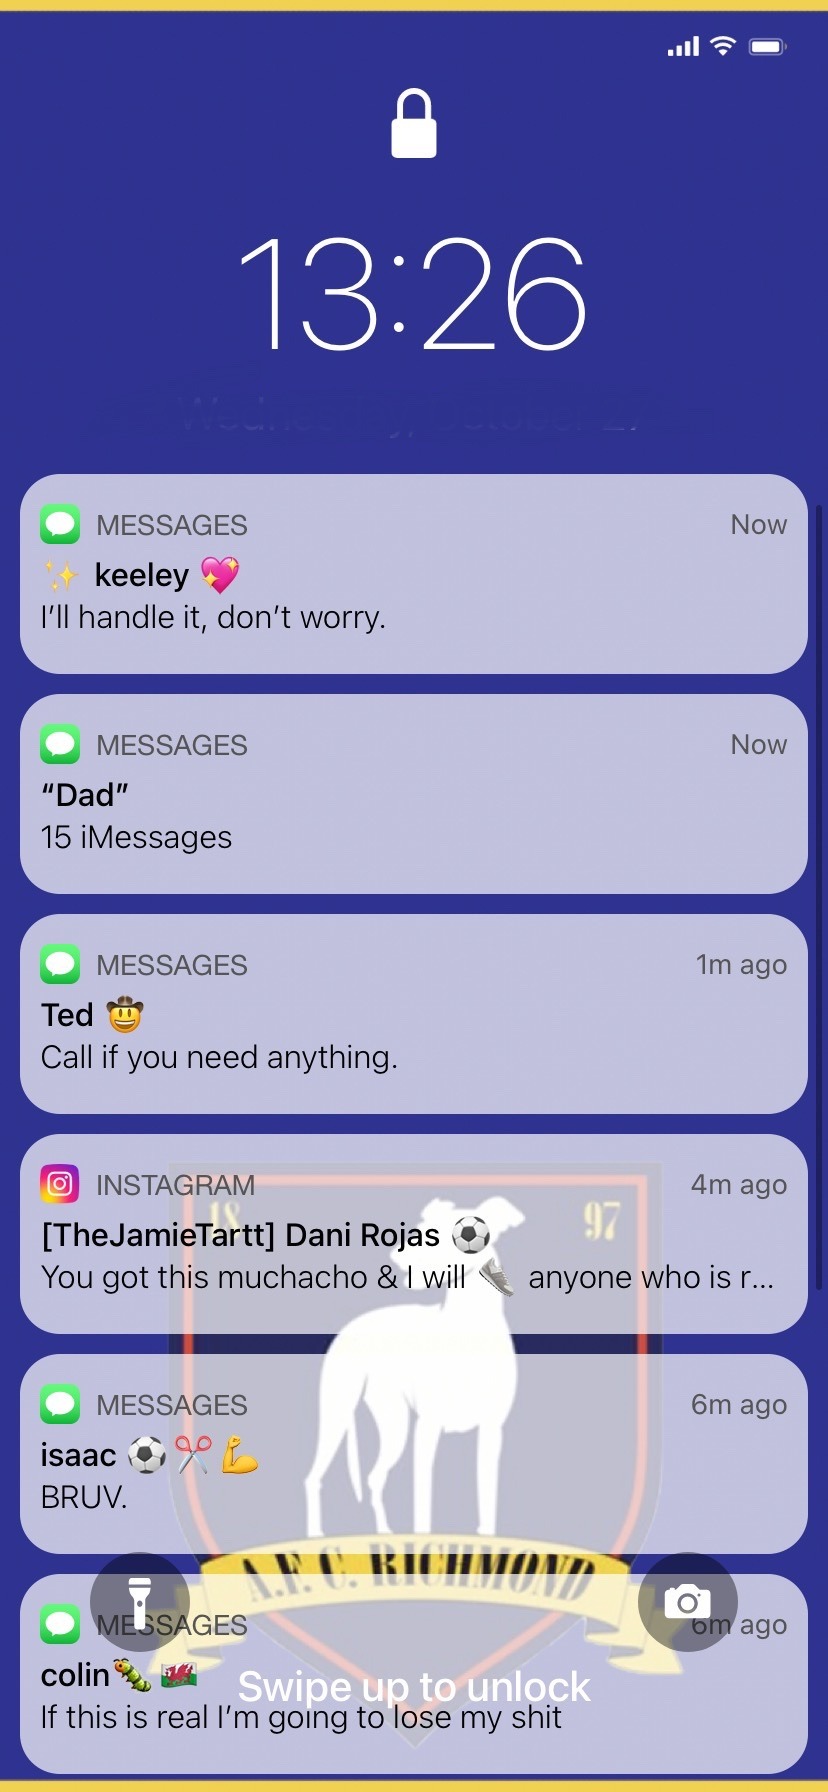 Screenshot of an iPhone lockscreen at 13:26 with a Richmond AFC background. Message from Keeley (sparkle emoji, sparkling heart emoji): I'll handle it, don't worry. Messages from "Dad": 15 iMessages. Message from Ted (cowboy emoji), one minute ago: Call if you need anything. Instagram DM to [TheJamieTartt] from Dani Rojas (football emoji), four minutes ago: You got this muchacho & I will (trainer emoji) anyone who is r (text is cut off). Message from isaac (football emoji, scissor emoji, flexing emoji), 6 minutes ago: BRUV.